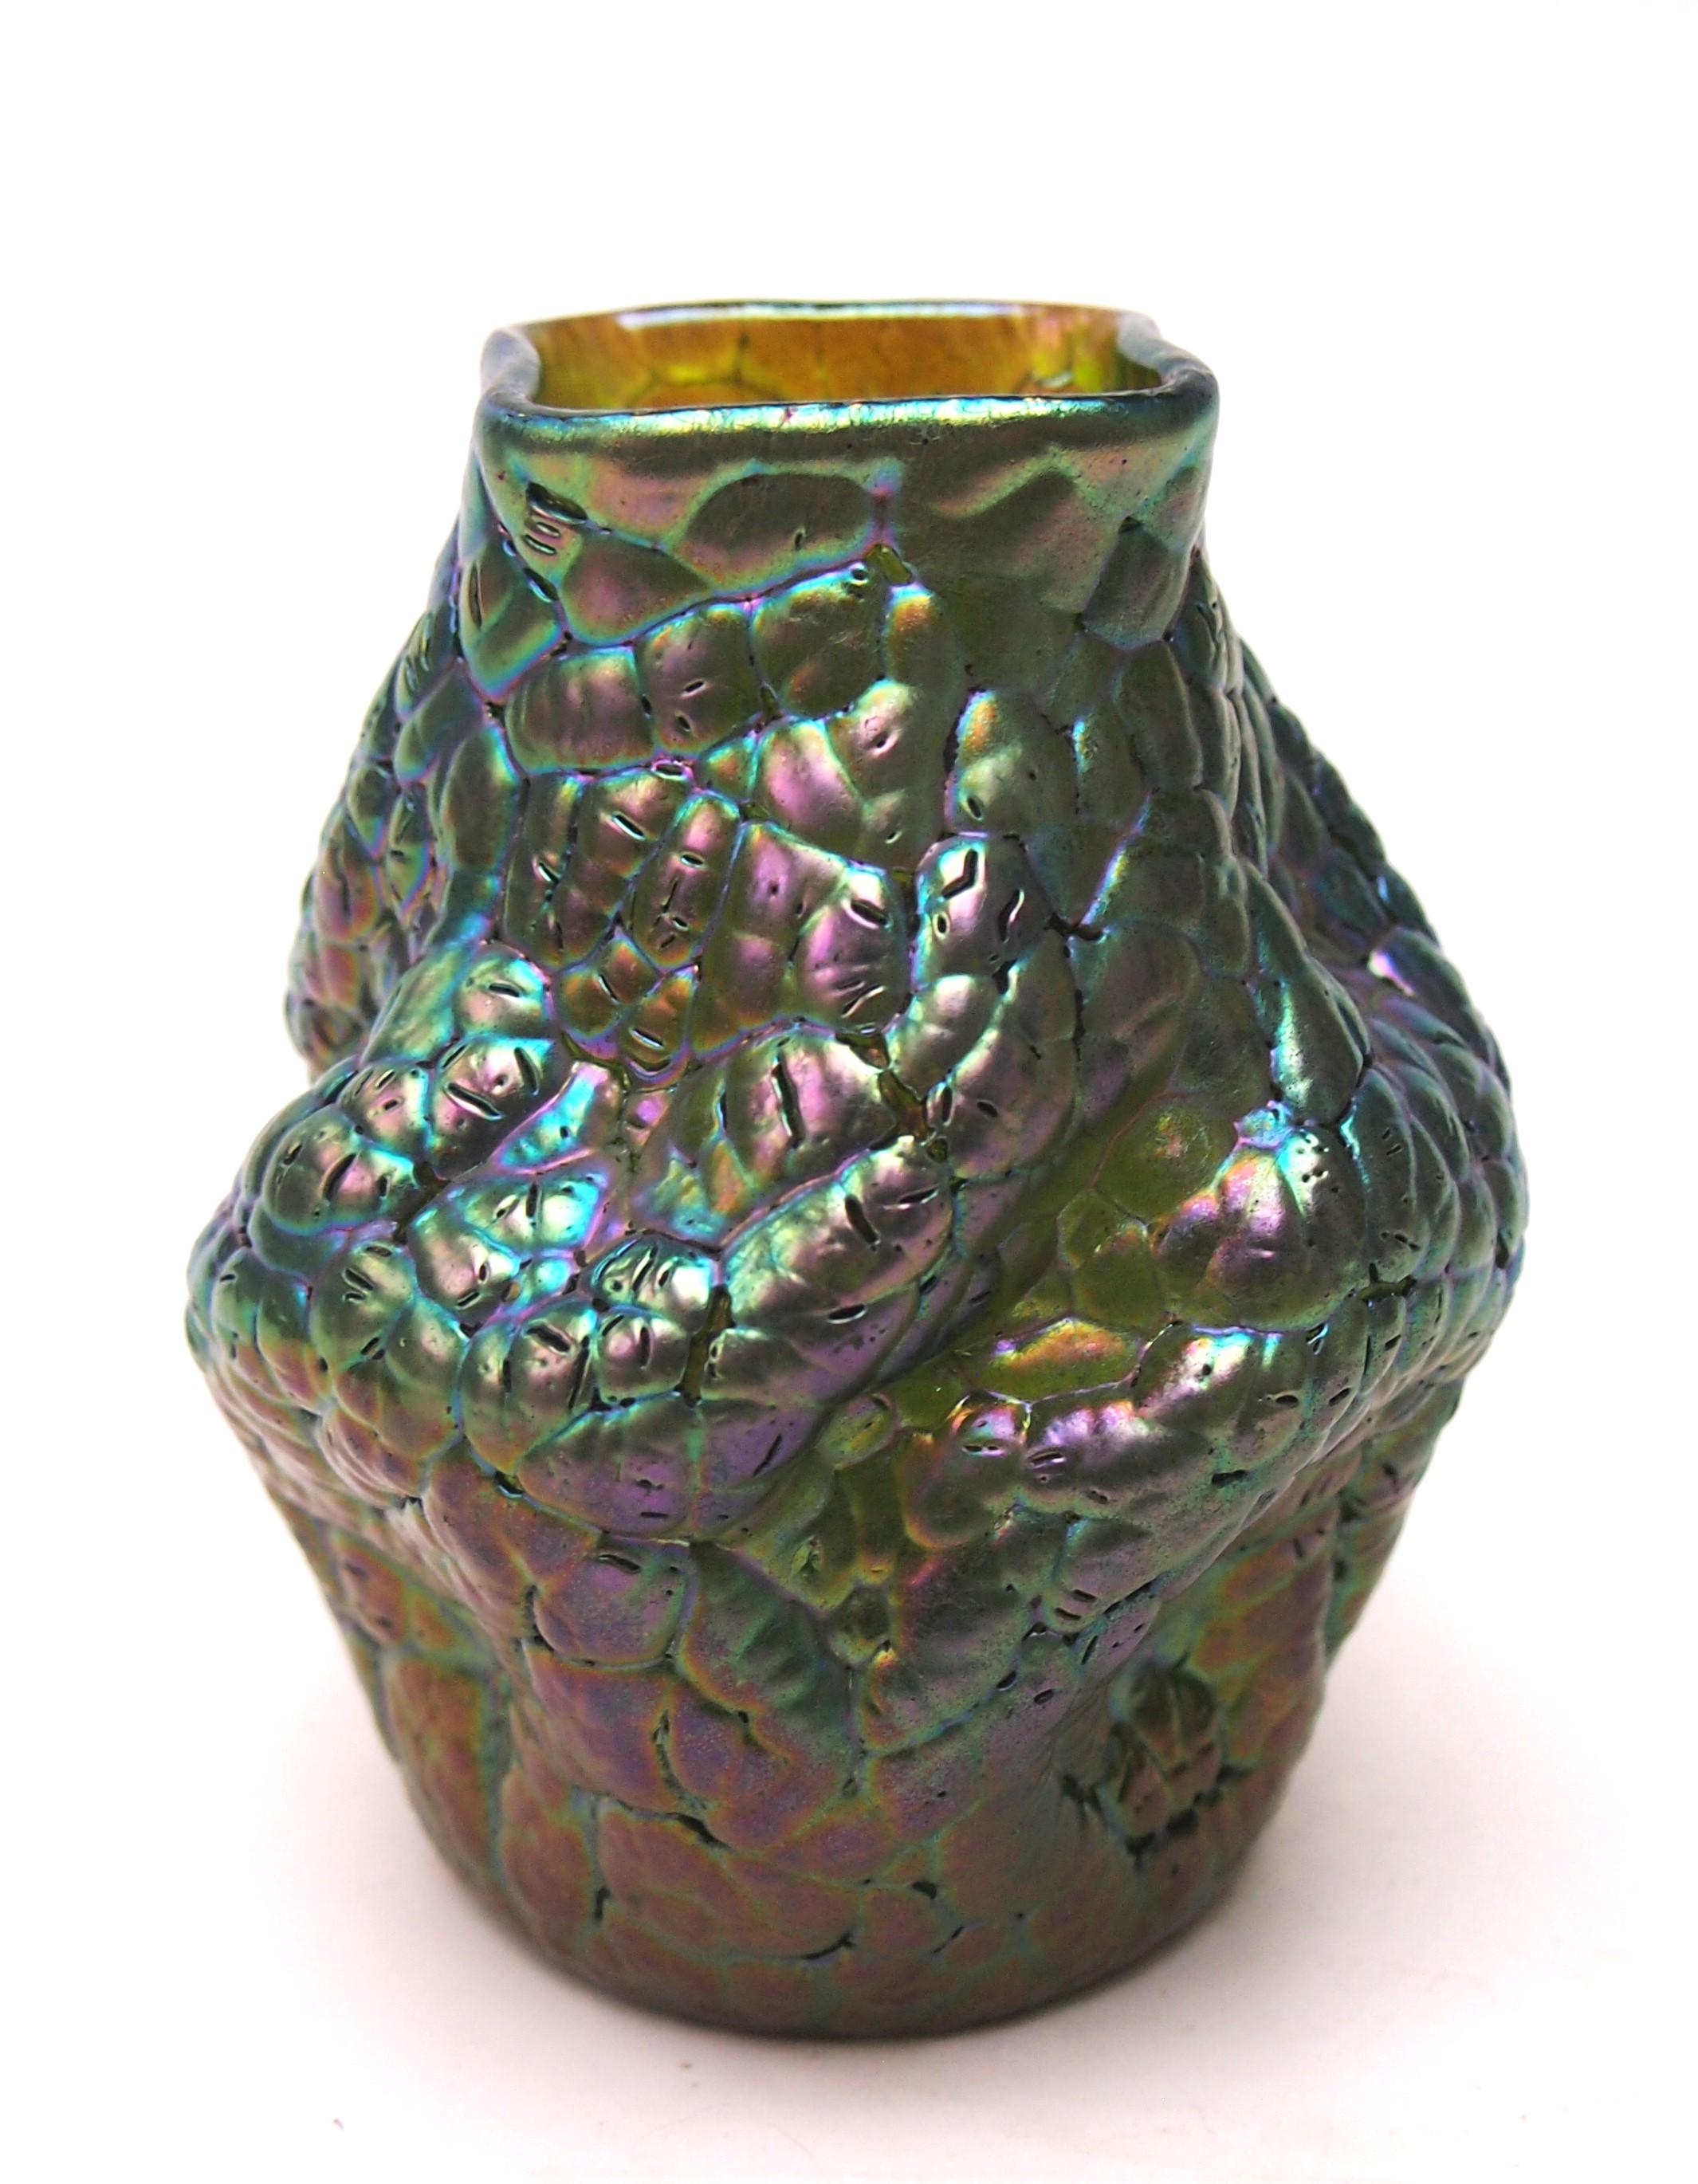 A stunning and fully documented Loetz Phaenomen Vase. This example is documented as Phaenomen pattern PG 377 and the colouring is called Crete (green) - fused crackle glass with marvered metallic granules.- This style was sometimes called Brain